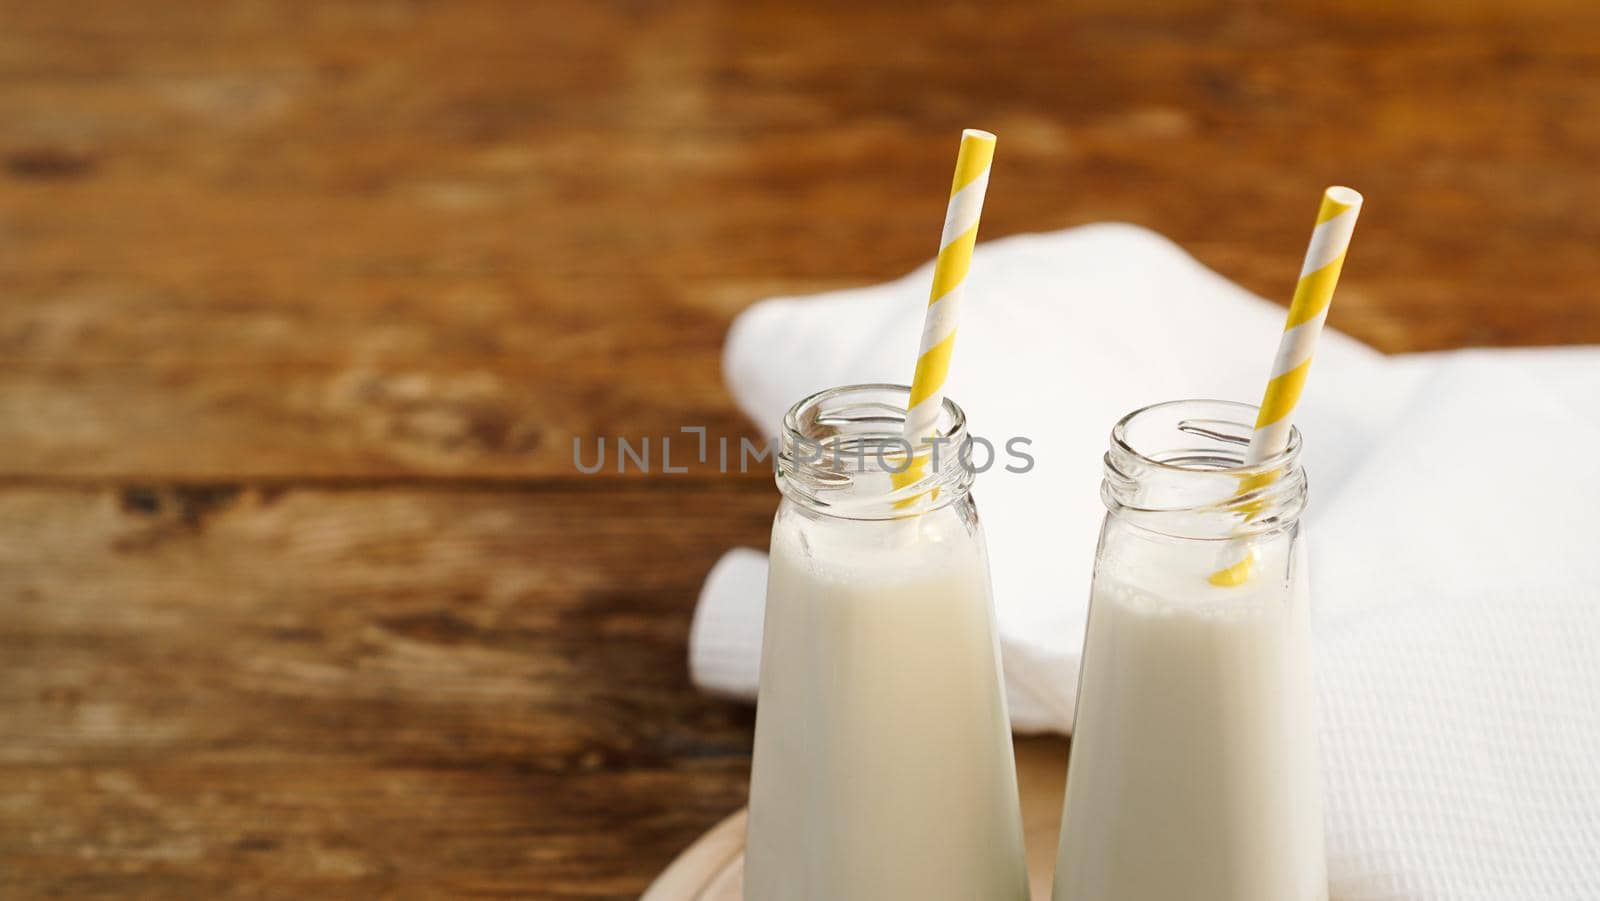 Two bottles of organic rustic milk on wooden table with yellow paper straws. Copy space